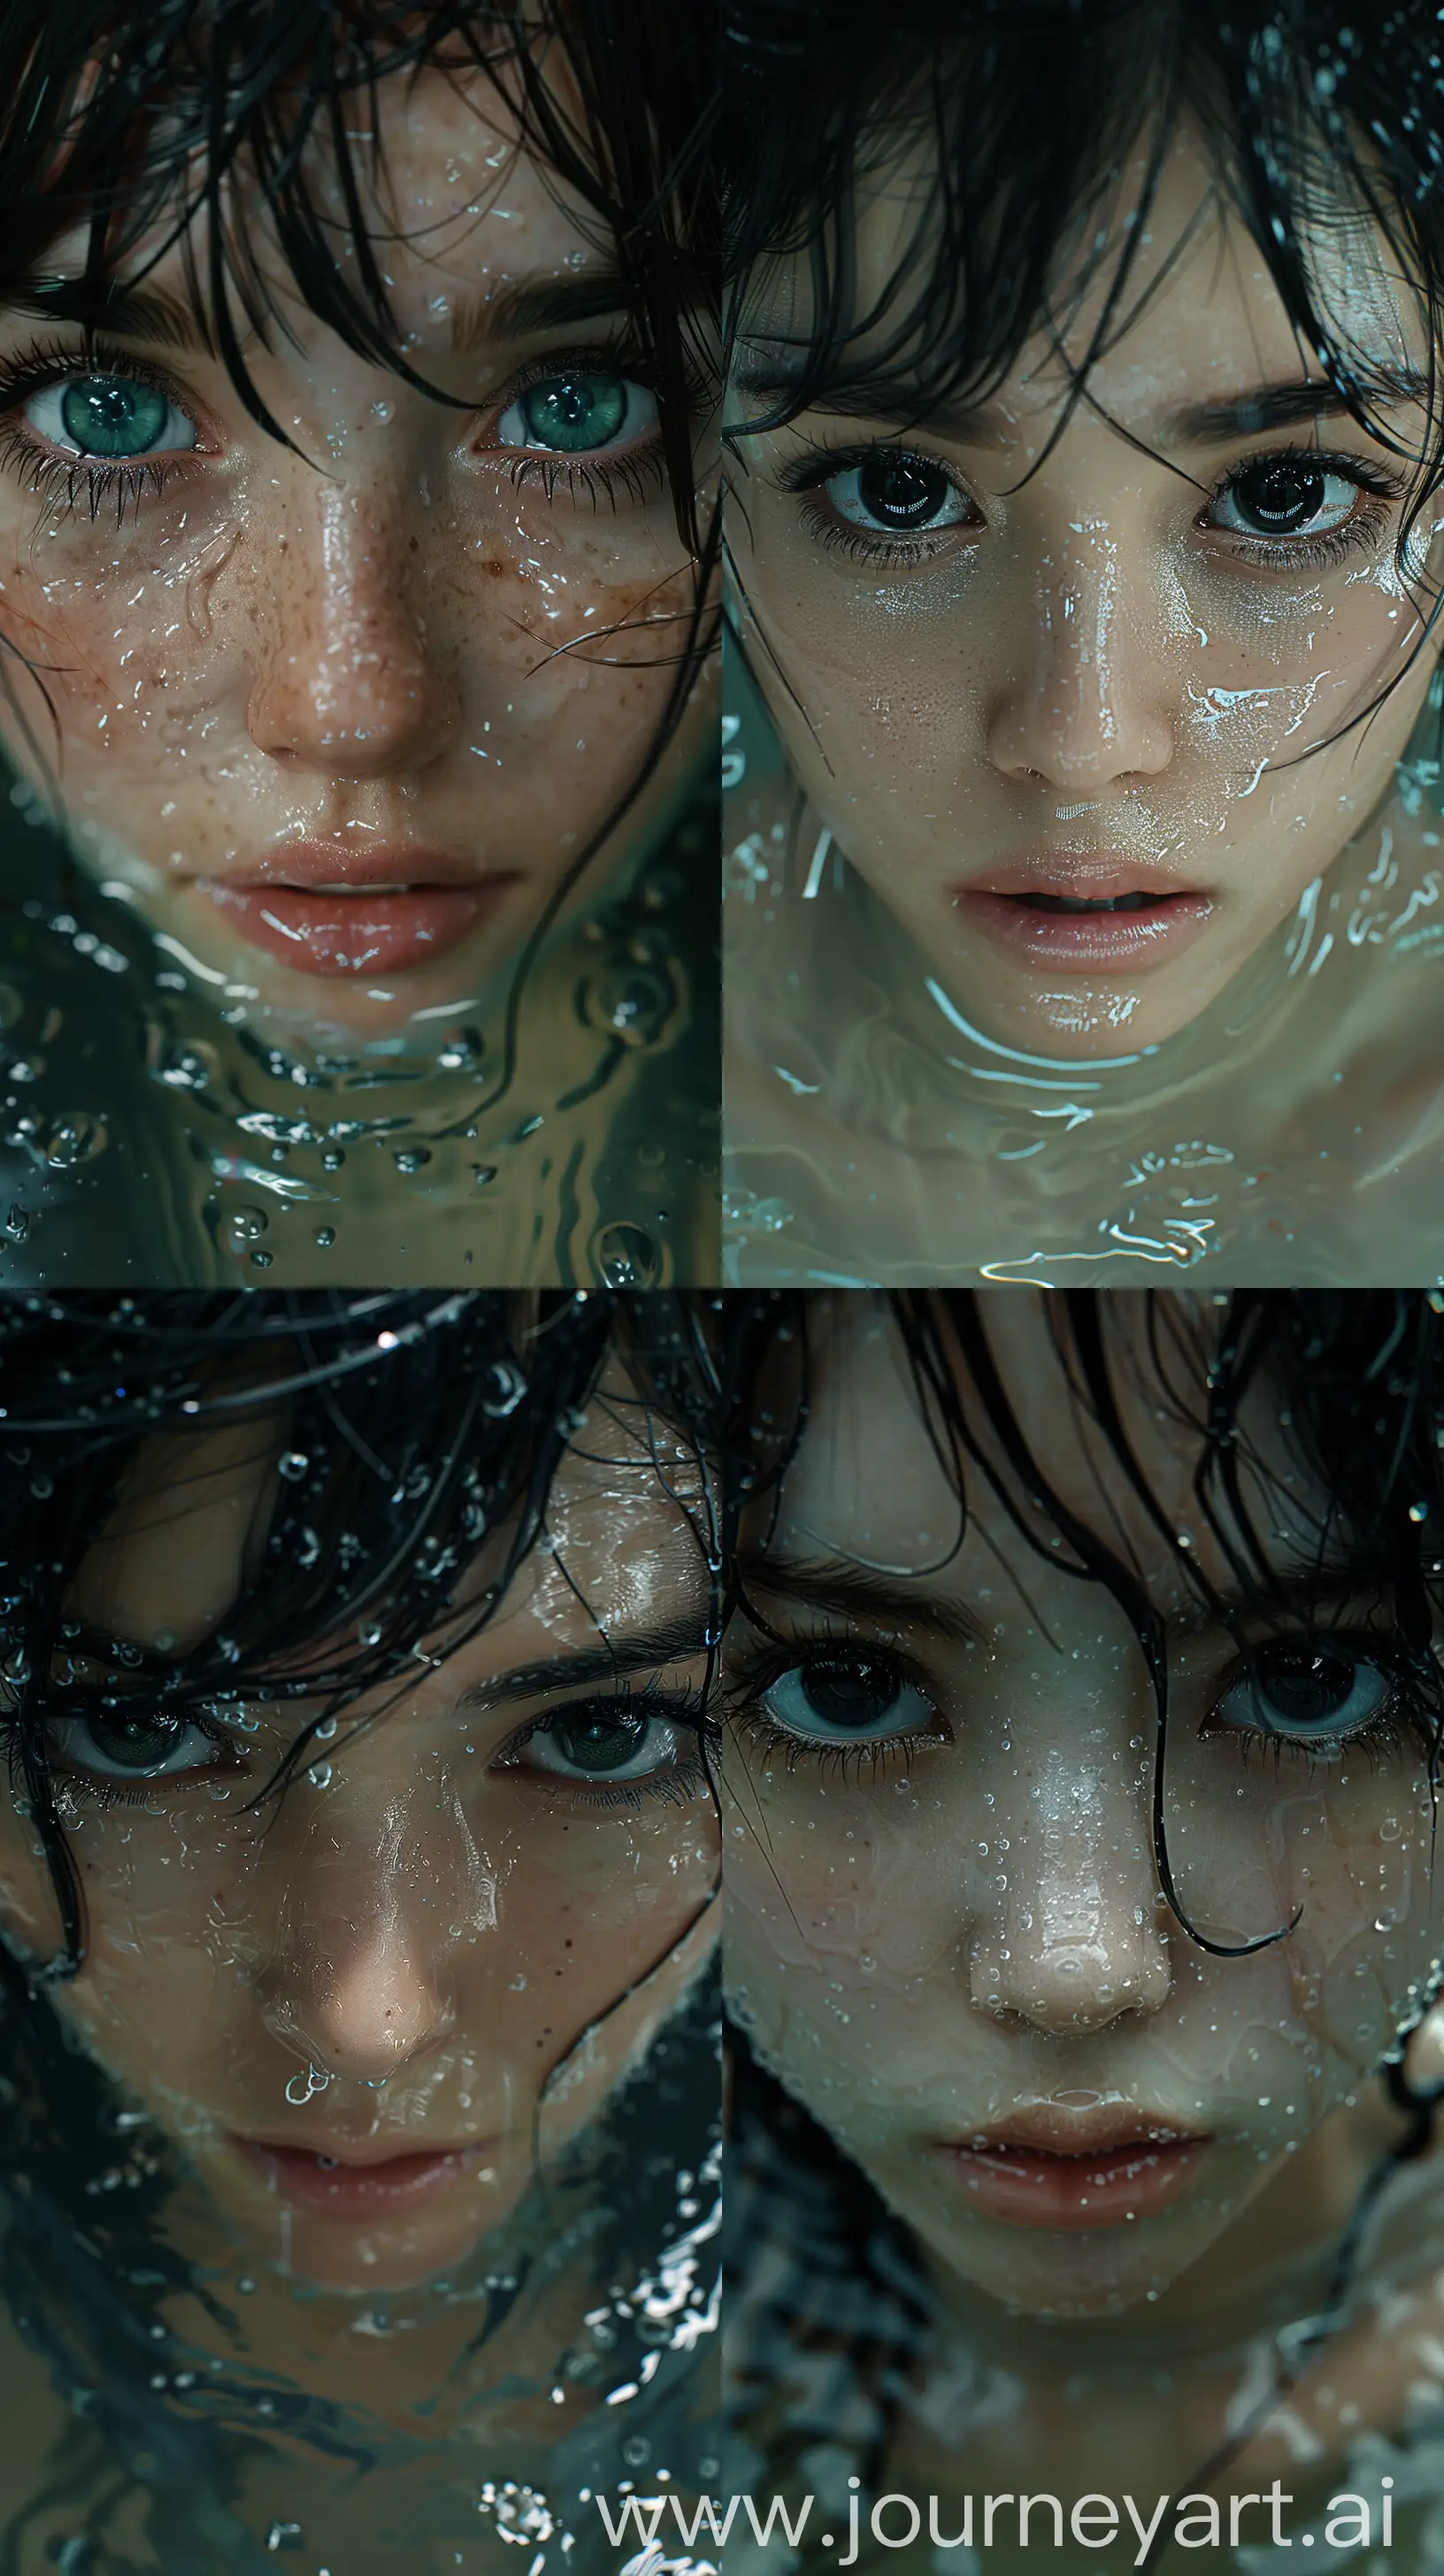 Ethereal-Dystopian-Realism-Enigmatic-Japanese-Girl-Submerged-in-Surreal-Waters